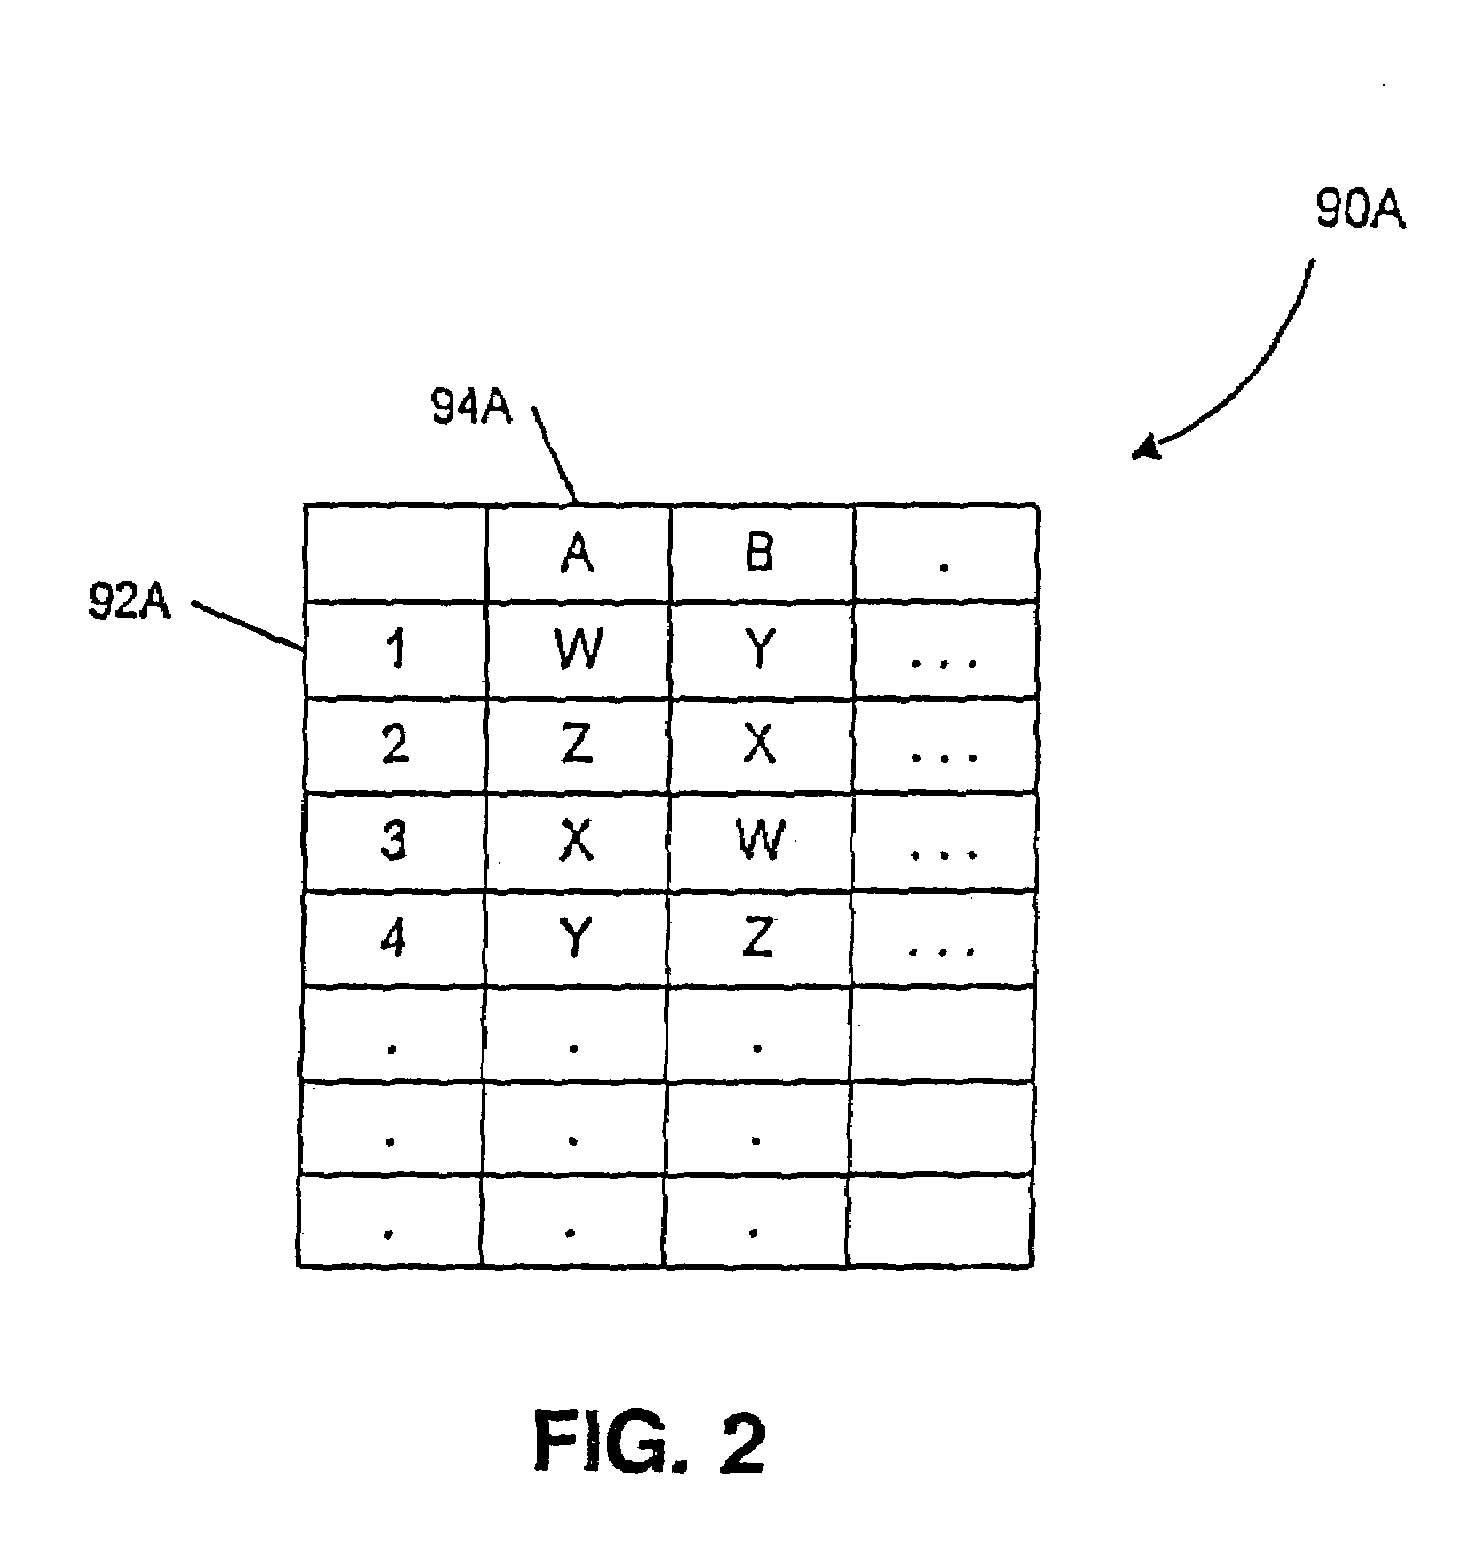 Computer system and process for transferring multiple high bandwidth streams of data between multiple storage units and multiple applications in a scalable and reliable manner